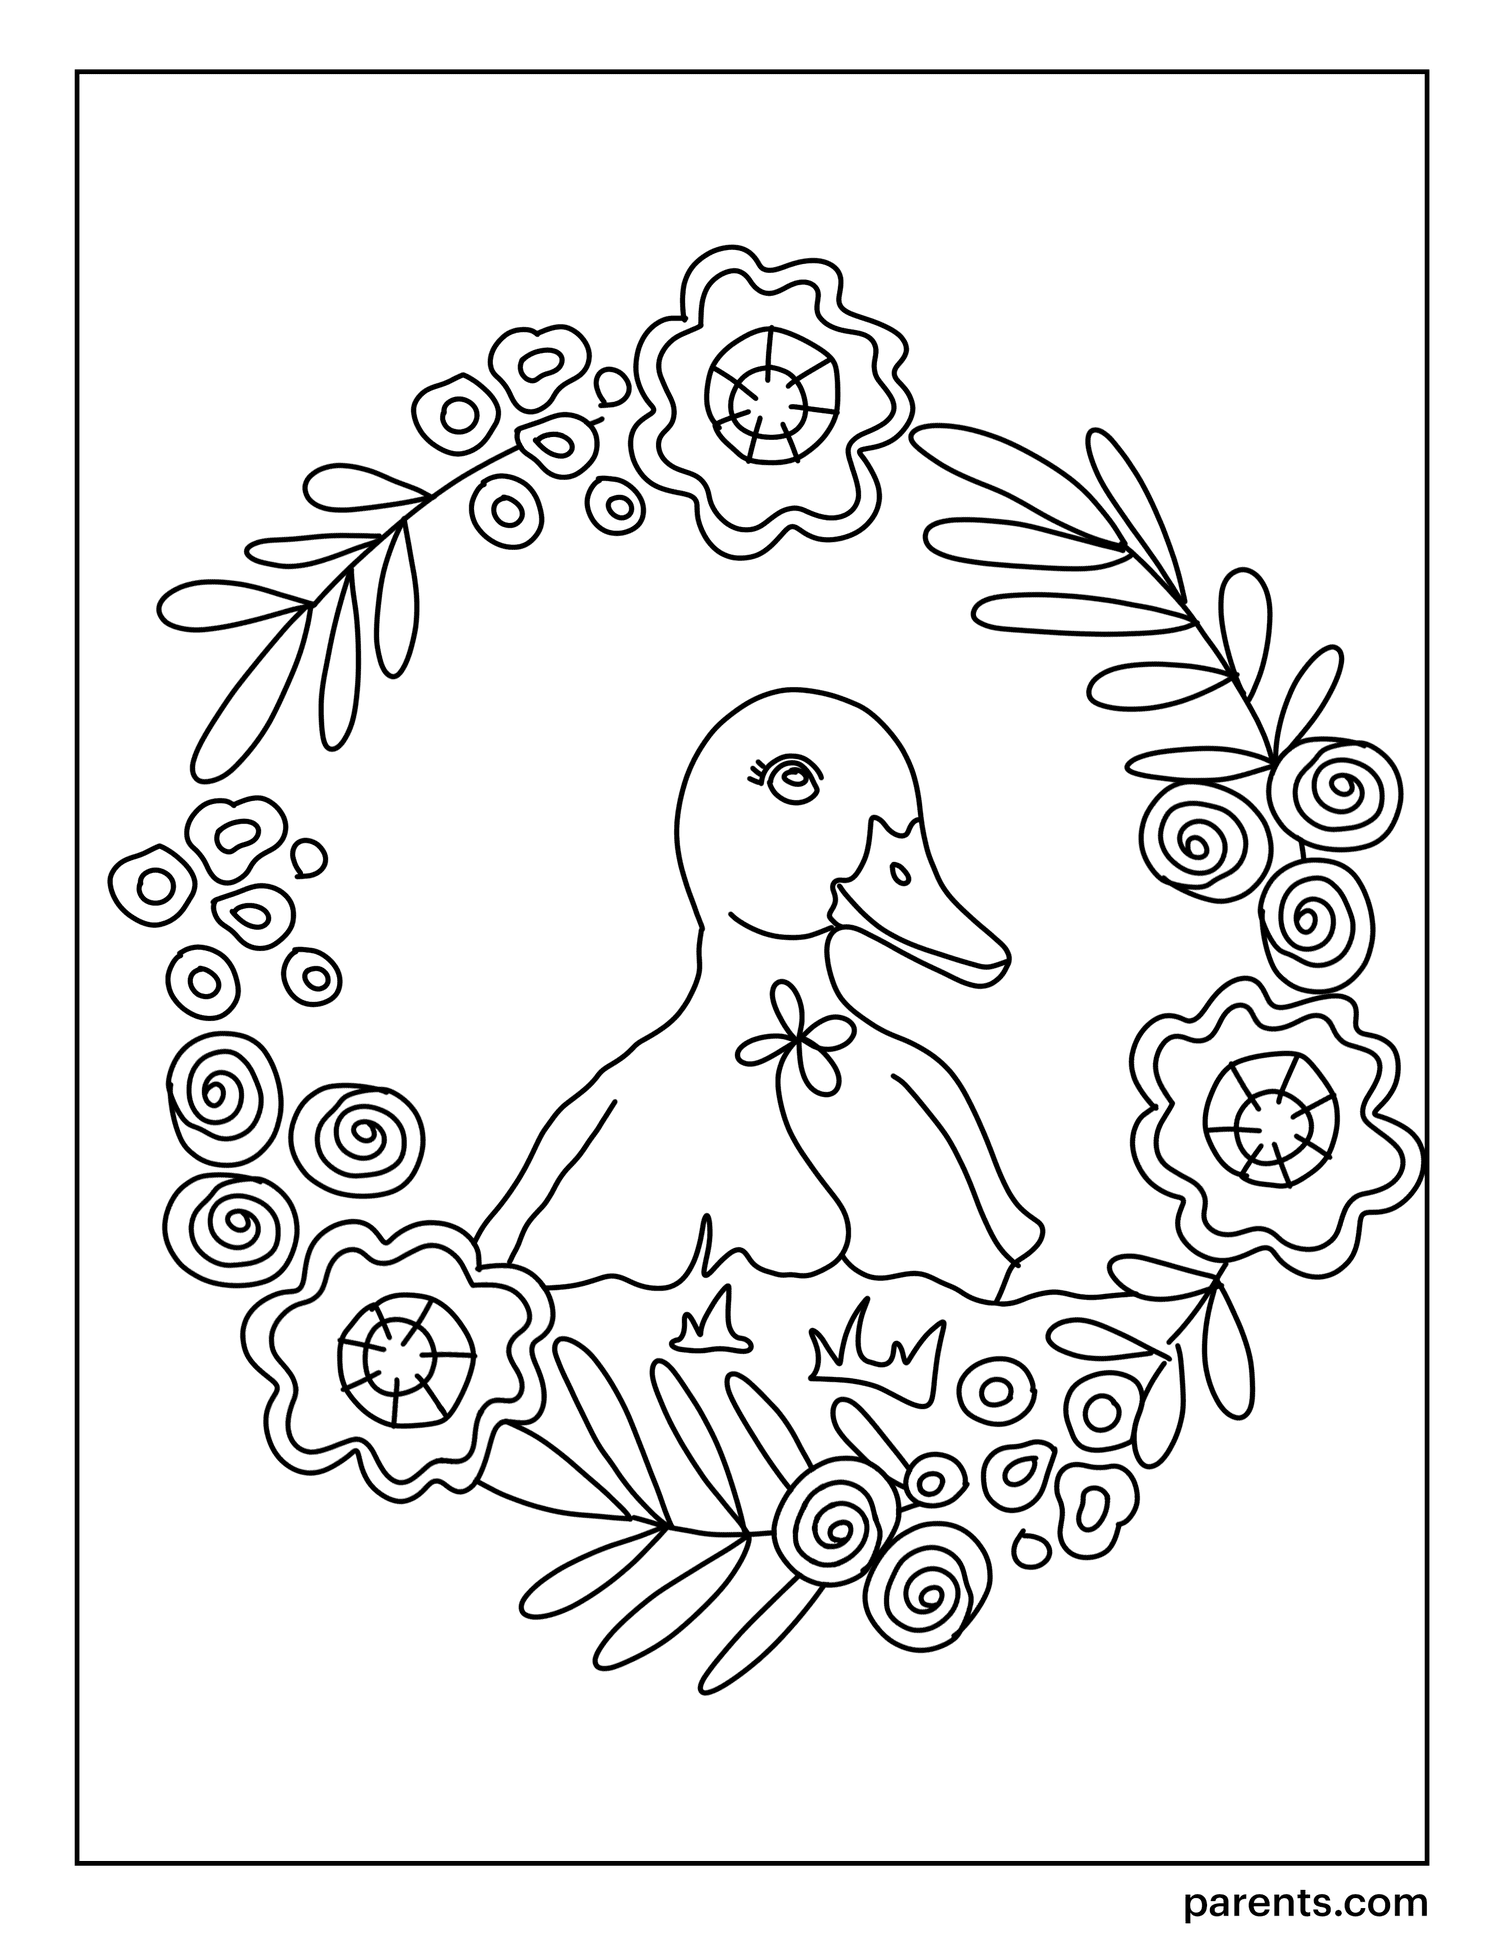 Easter Duckling Coloring Page